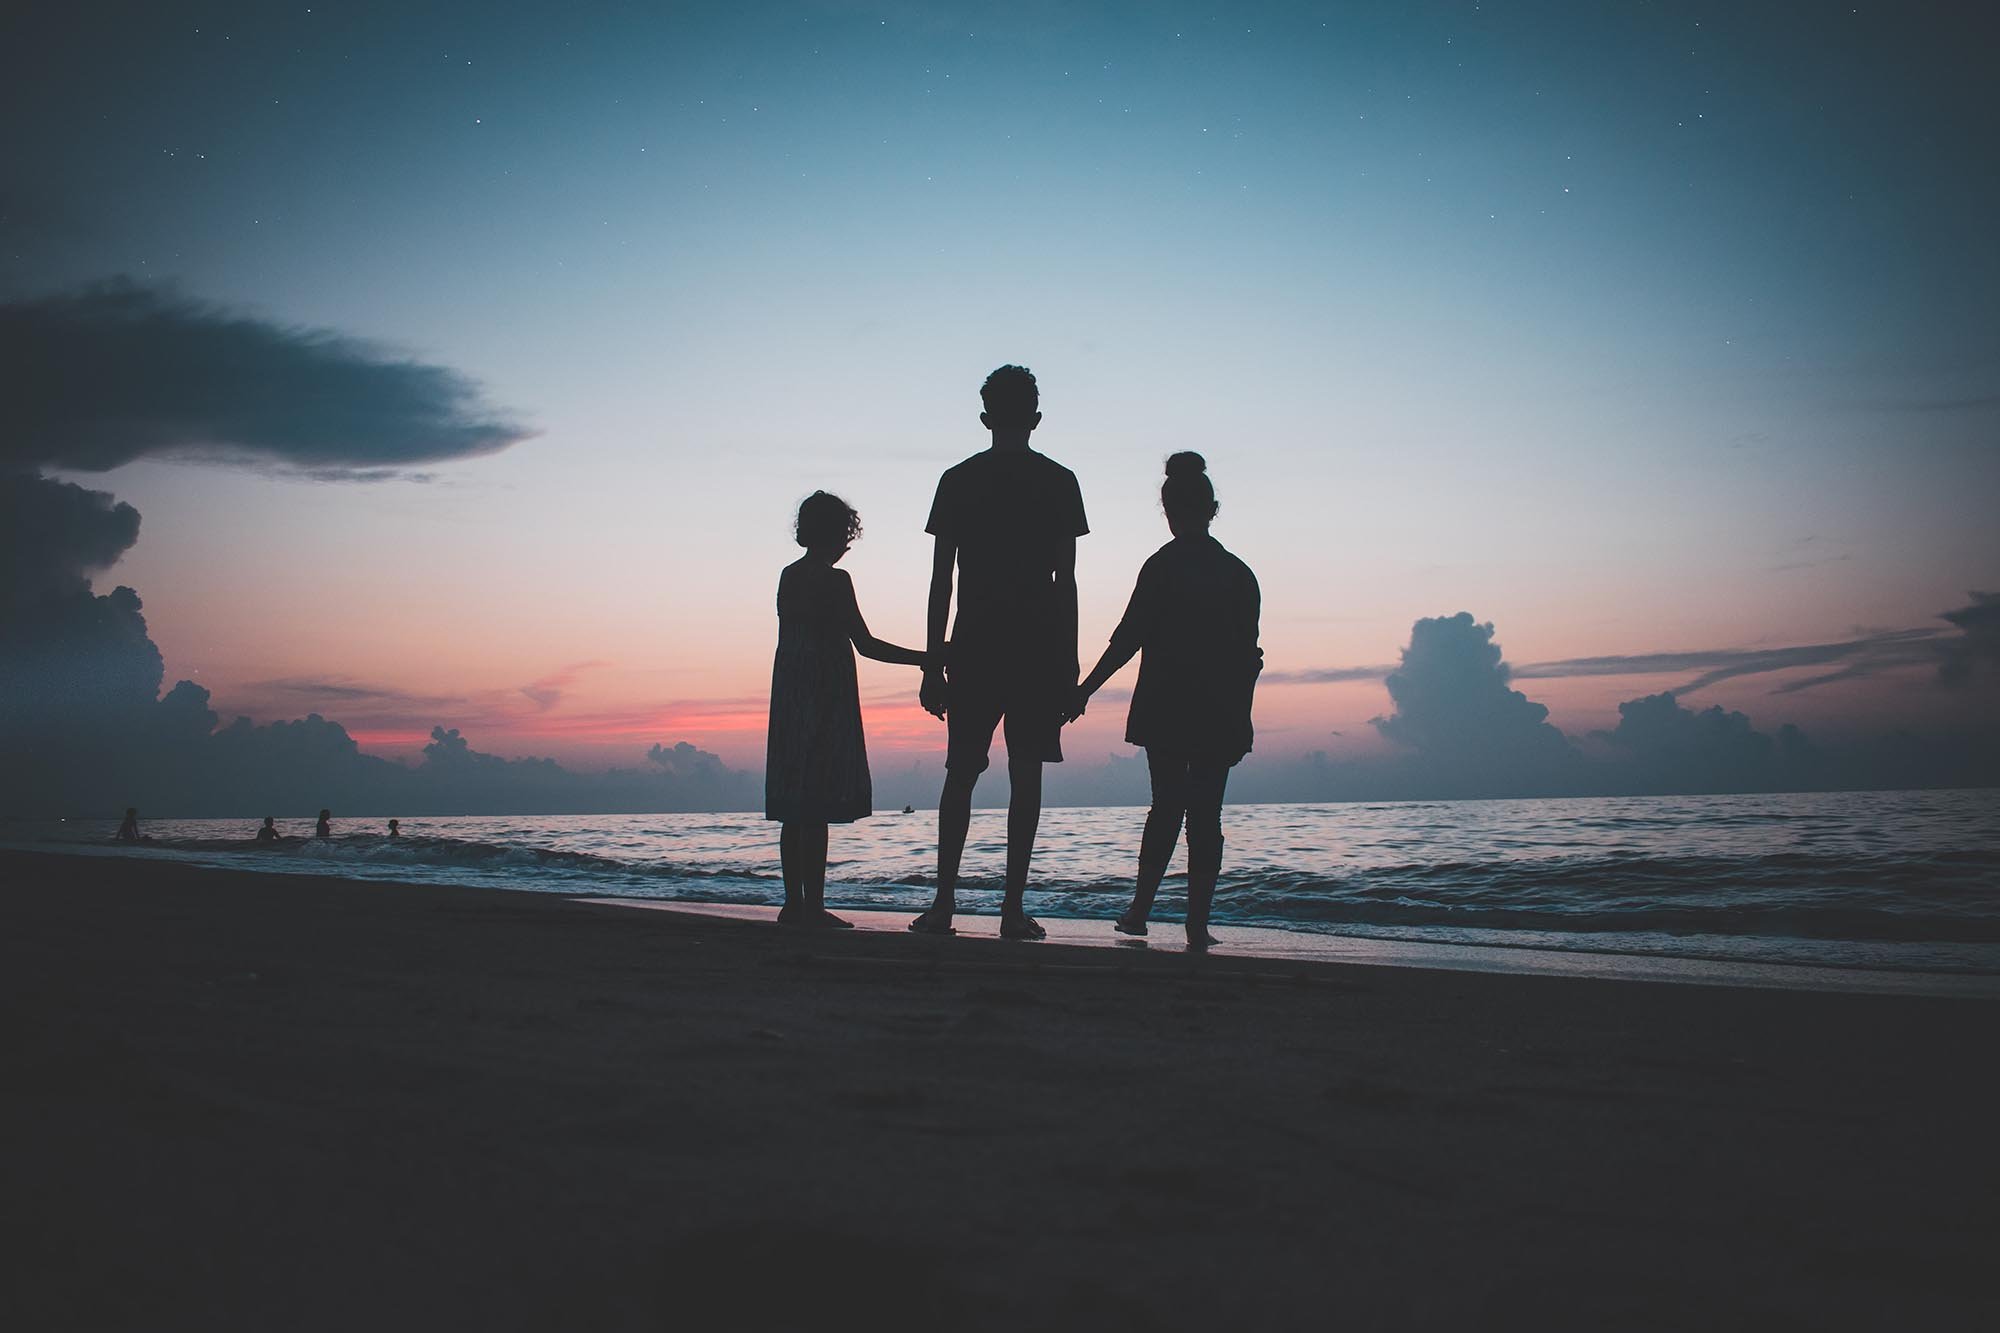 A quarter of the refugees who entered Europe in 2018 were children, and 40% of these were unaccompanied by adults. Image credit - Kylo/ Unsplash